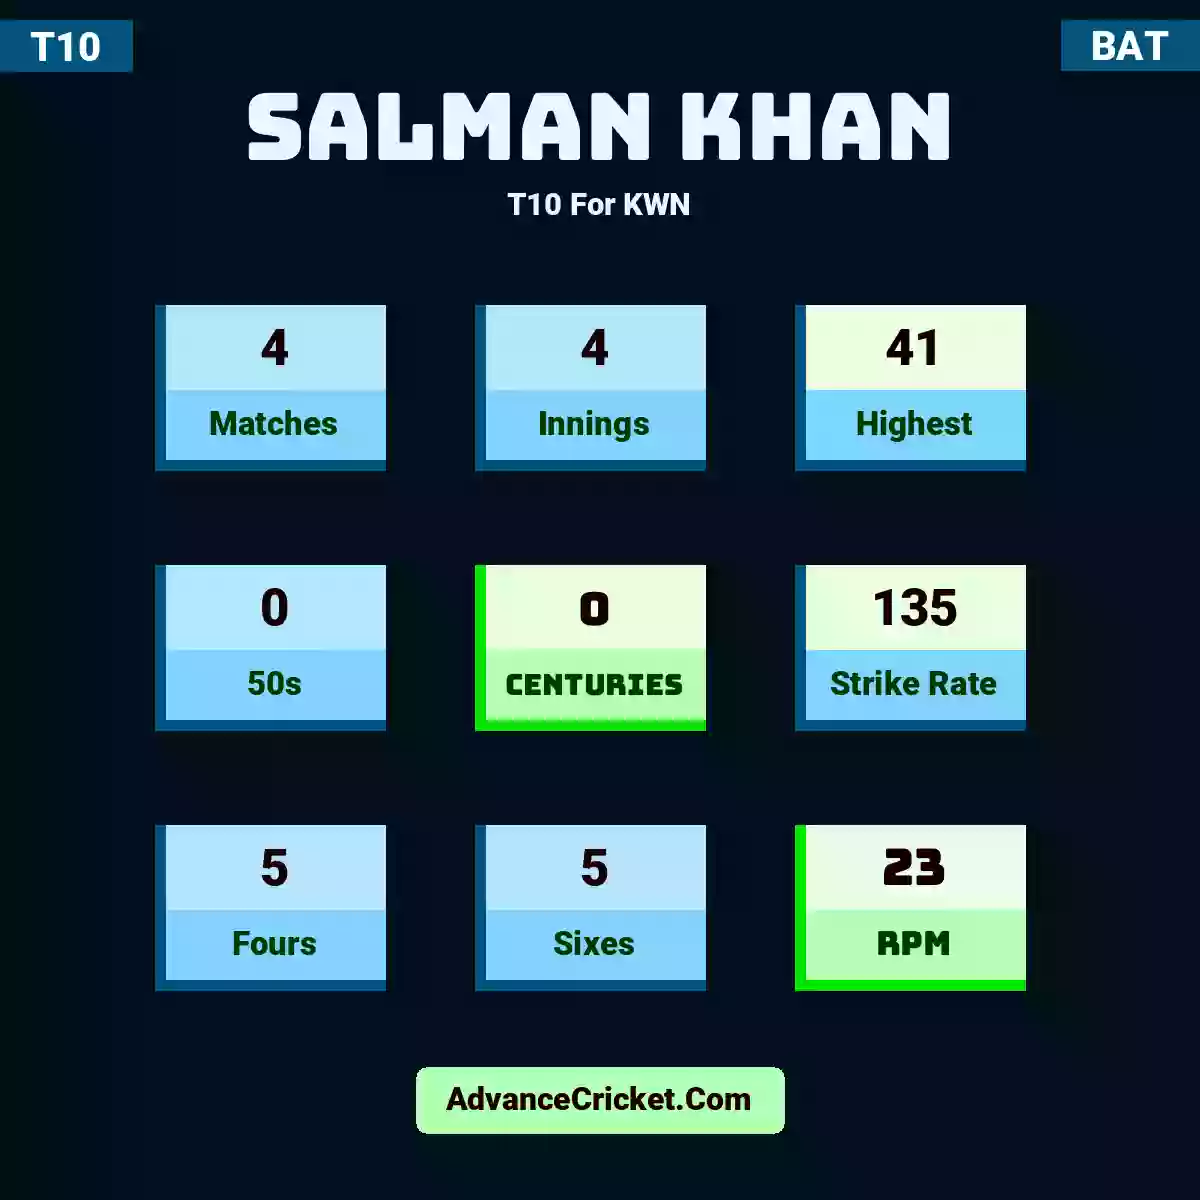 Salman Khan T10  For KWN, Salman Khan played 4 matches, scored 41 runs as highest, 0 half-centuries, and 0 centuries, with a strike rate of 135. S.Khan hit 5 fours and 5 sixes, with an RPM of 23.